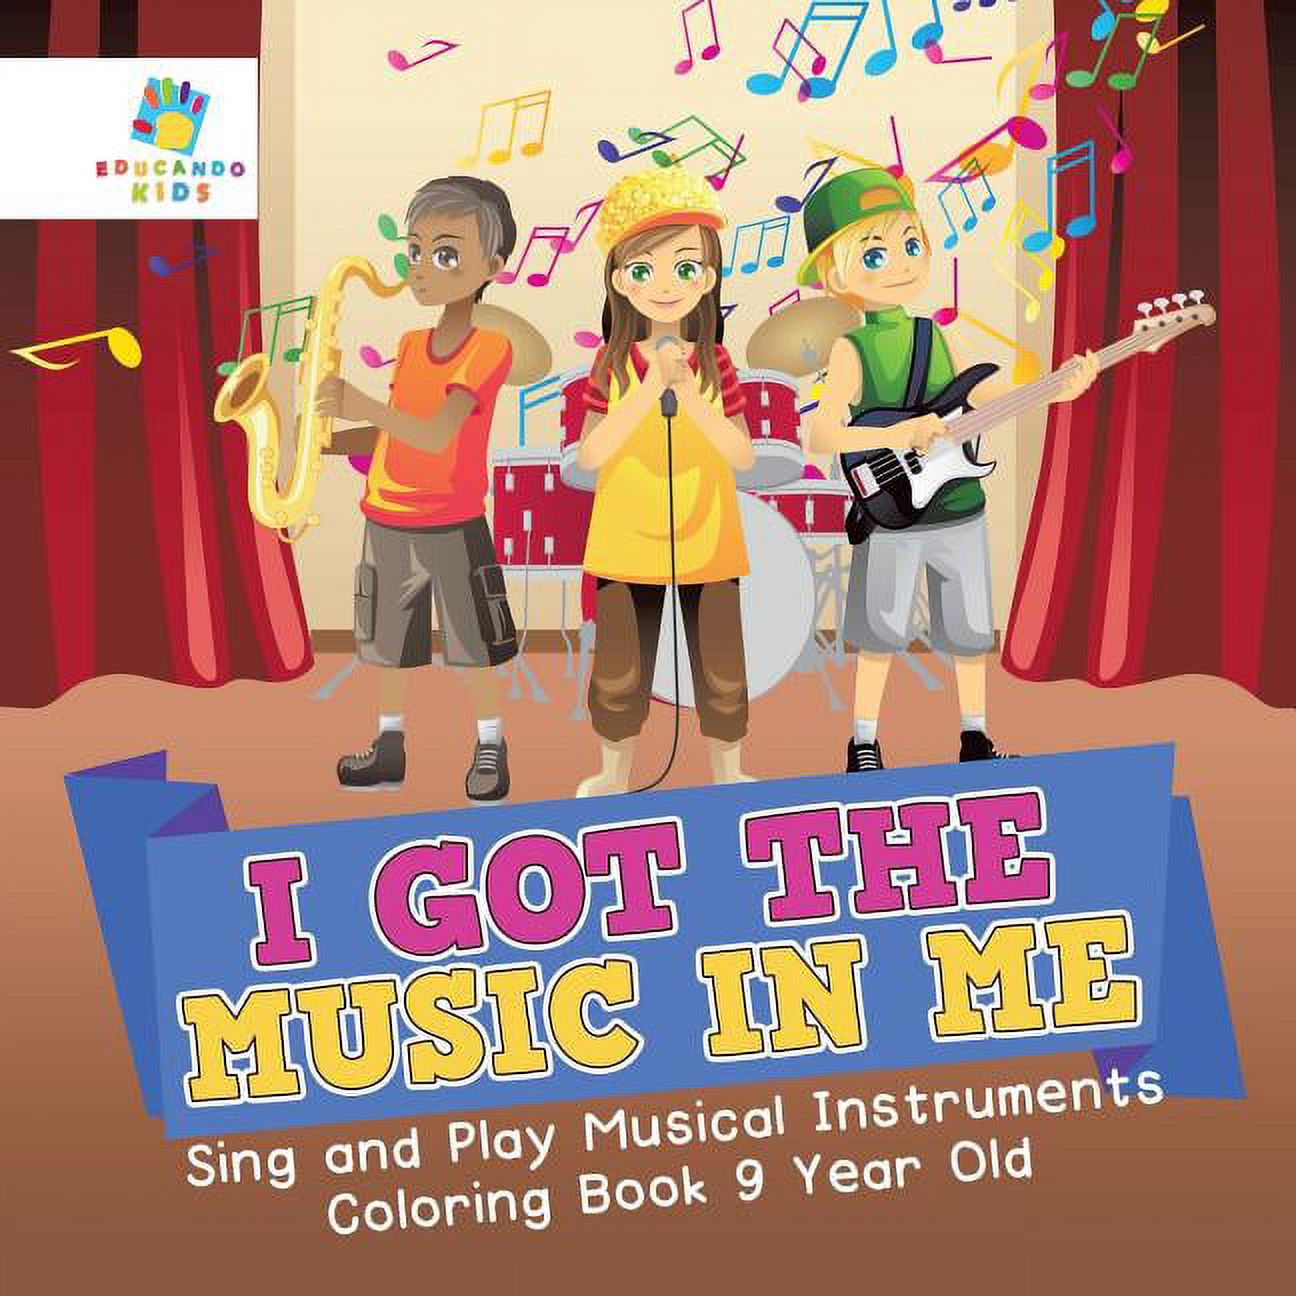 I Got the Music in Me Sing and Play Musical Instruments Coloring Book 9 Year Old (Paperback) - image 1 of 1